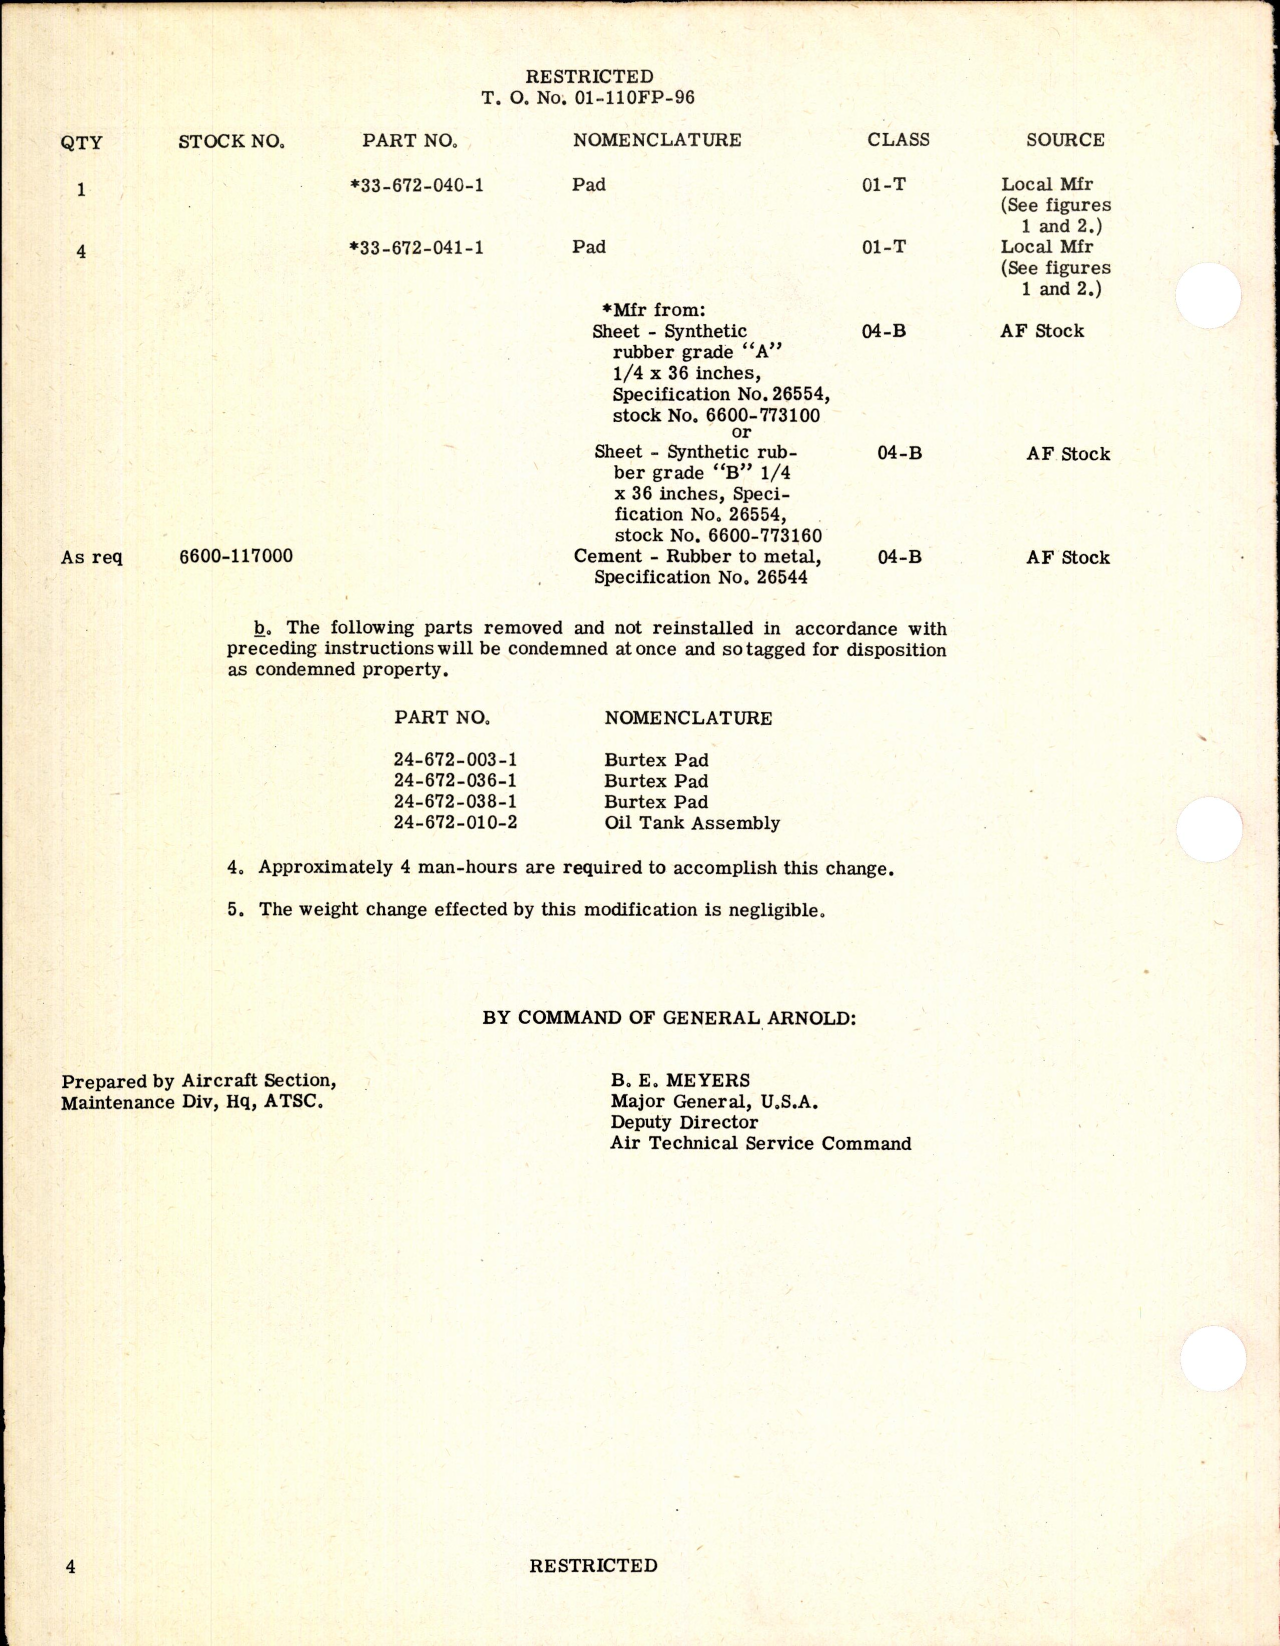 Sample page 4 from AirCorps Library document: Replacement of Main Oil Tank Support Pads